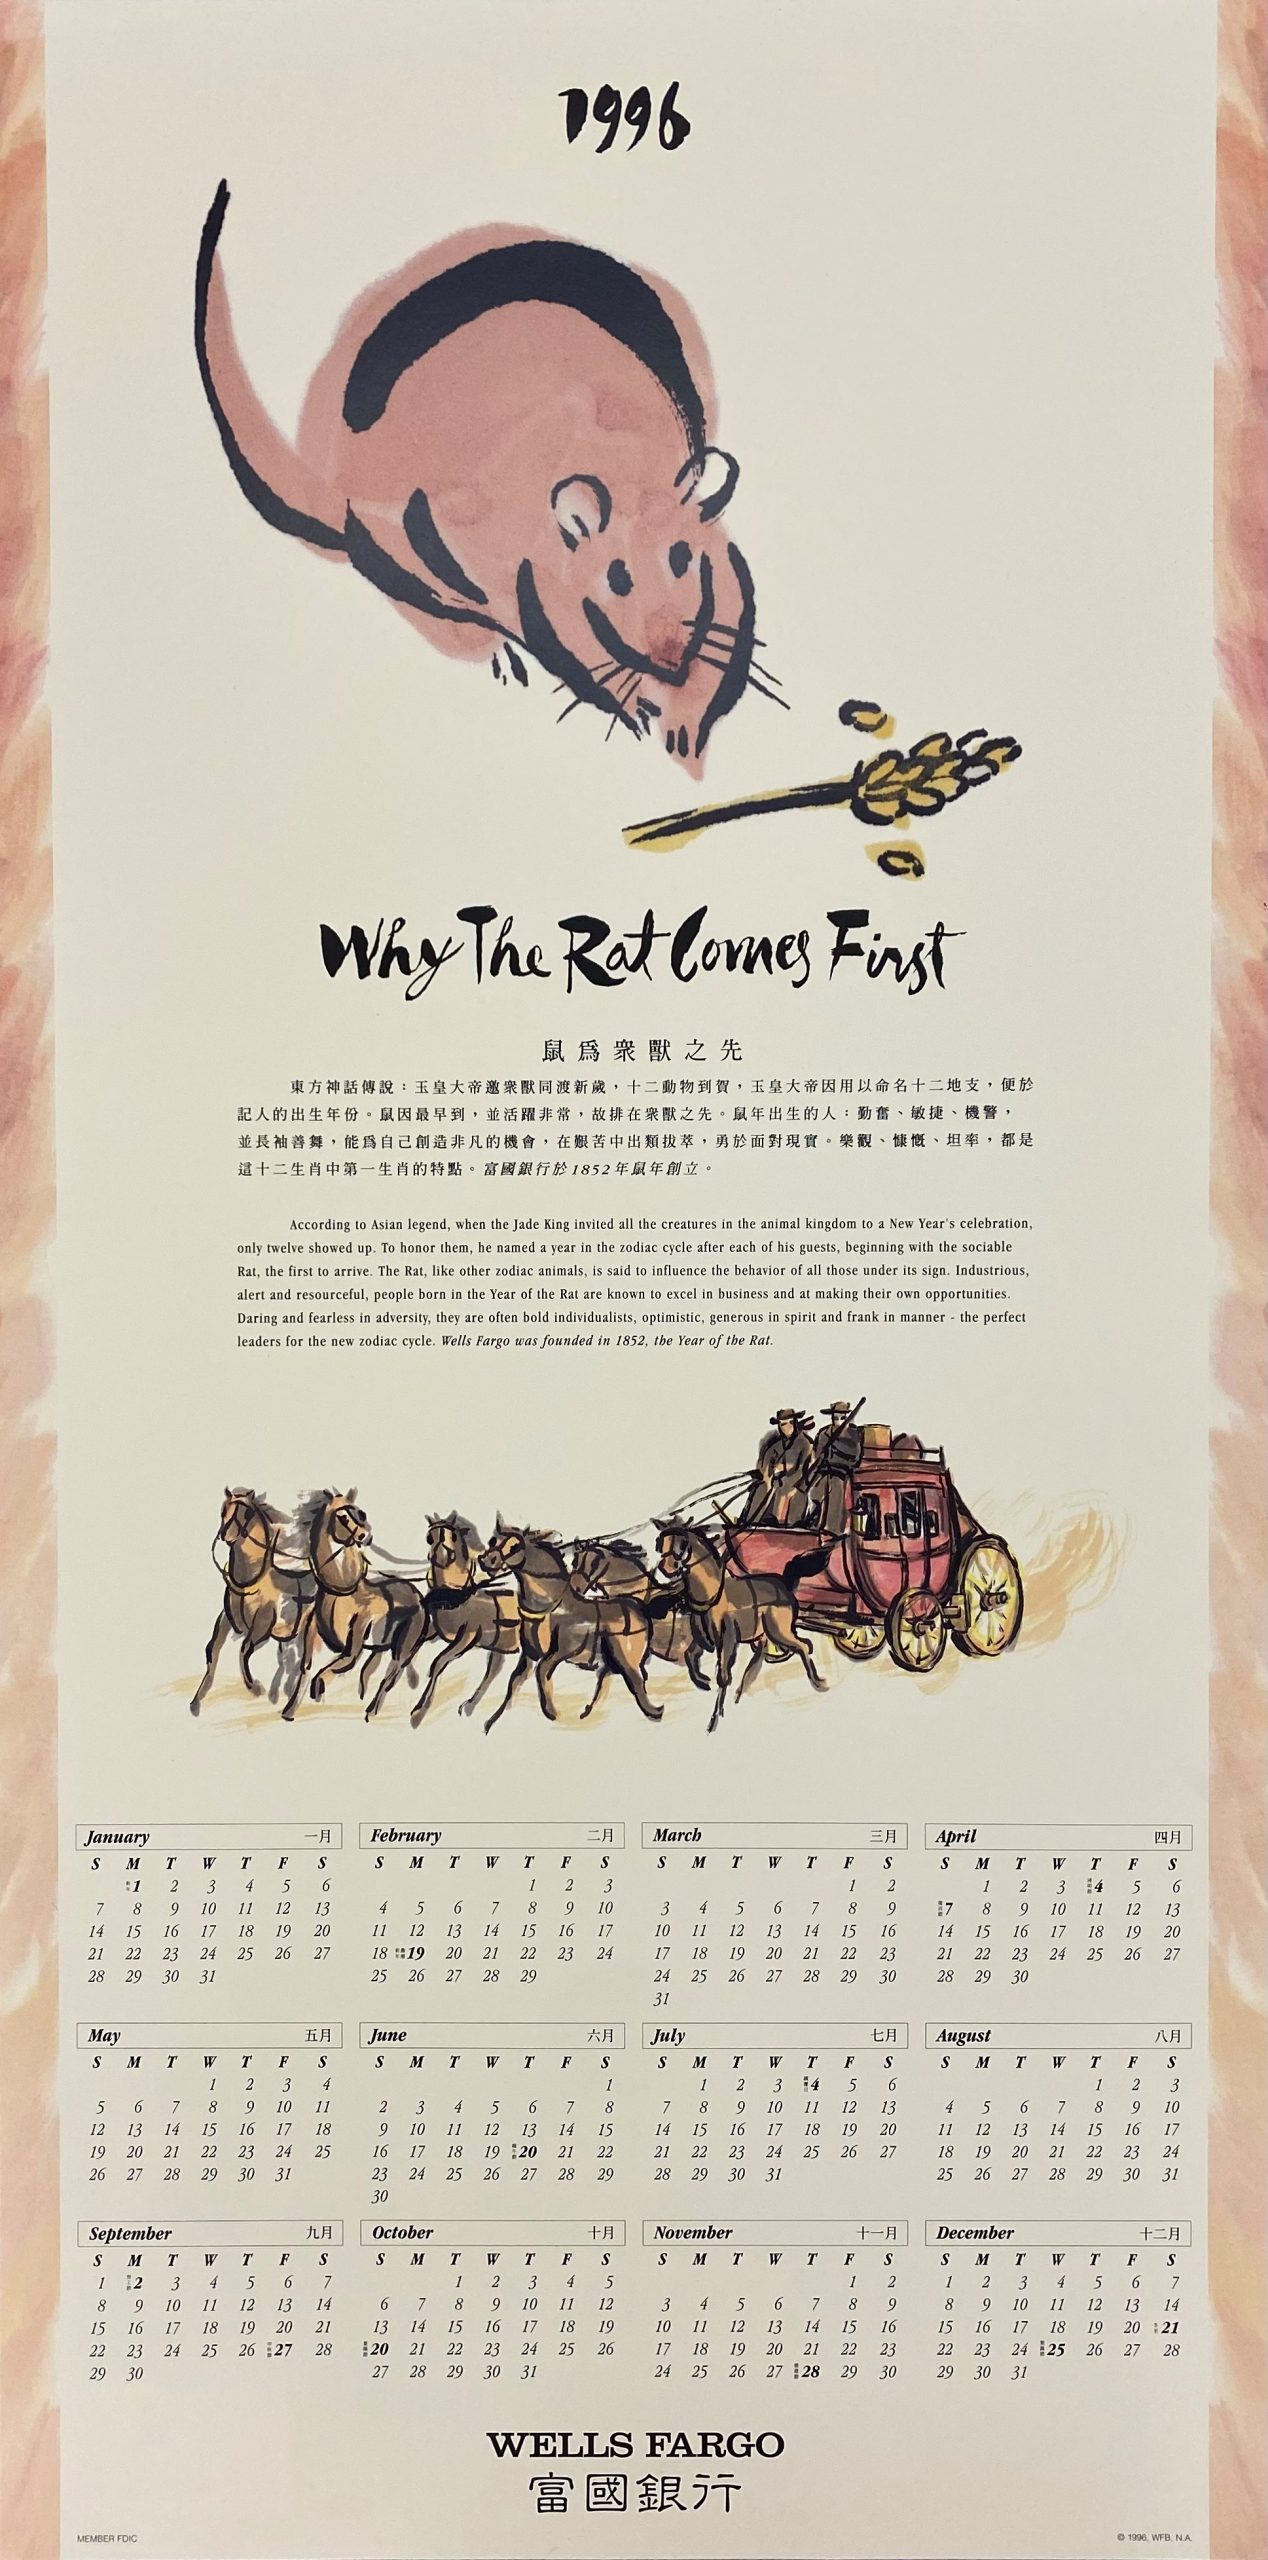 Calendar with illustration of Wells Fargo Stagecoach. Also features a rat with the title Why the Rat came first.